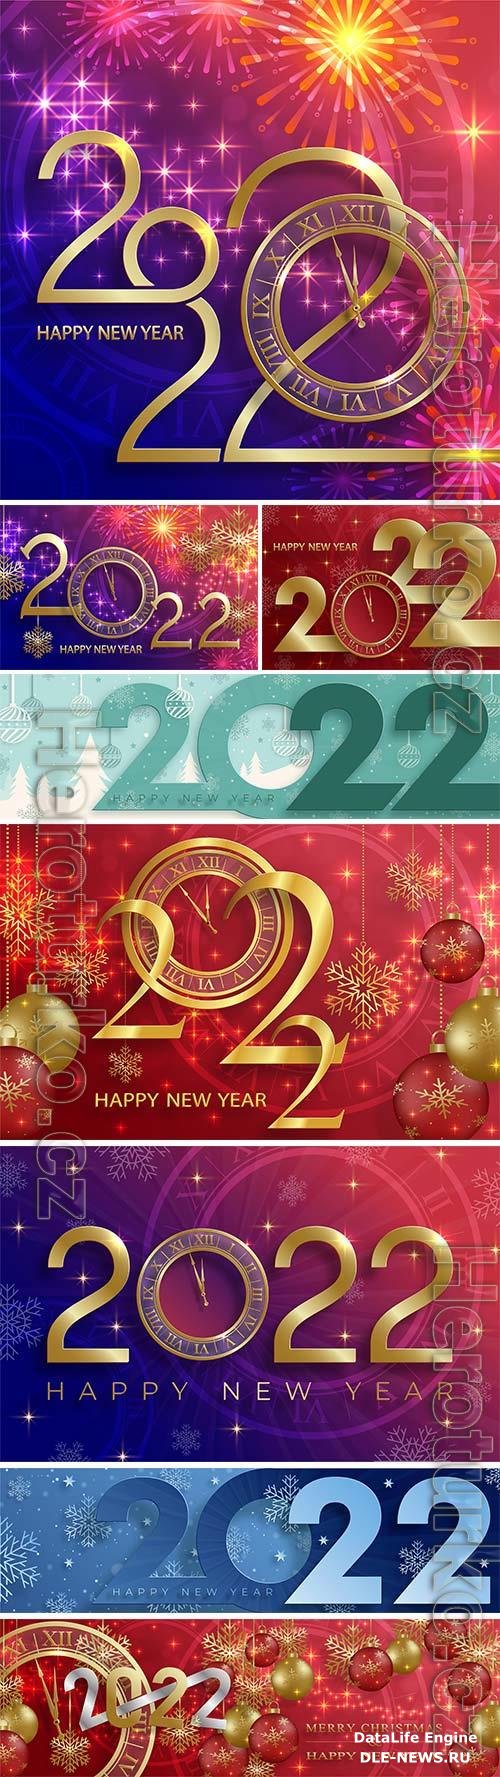 Happy new year 2022, christmas balls and snowflakes concept on color vector background